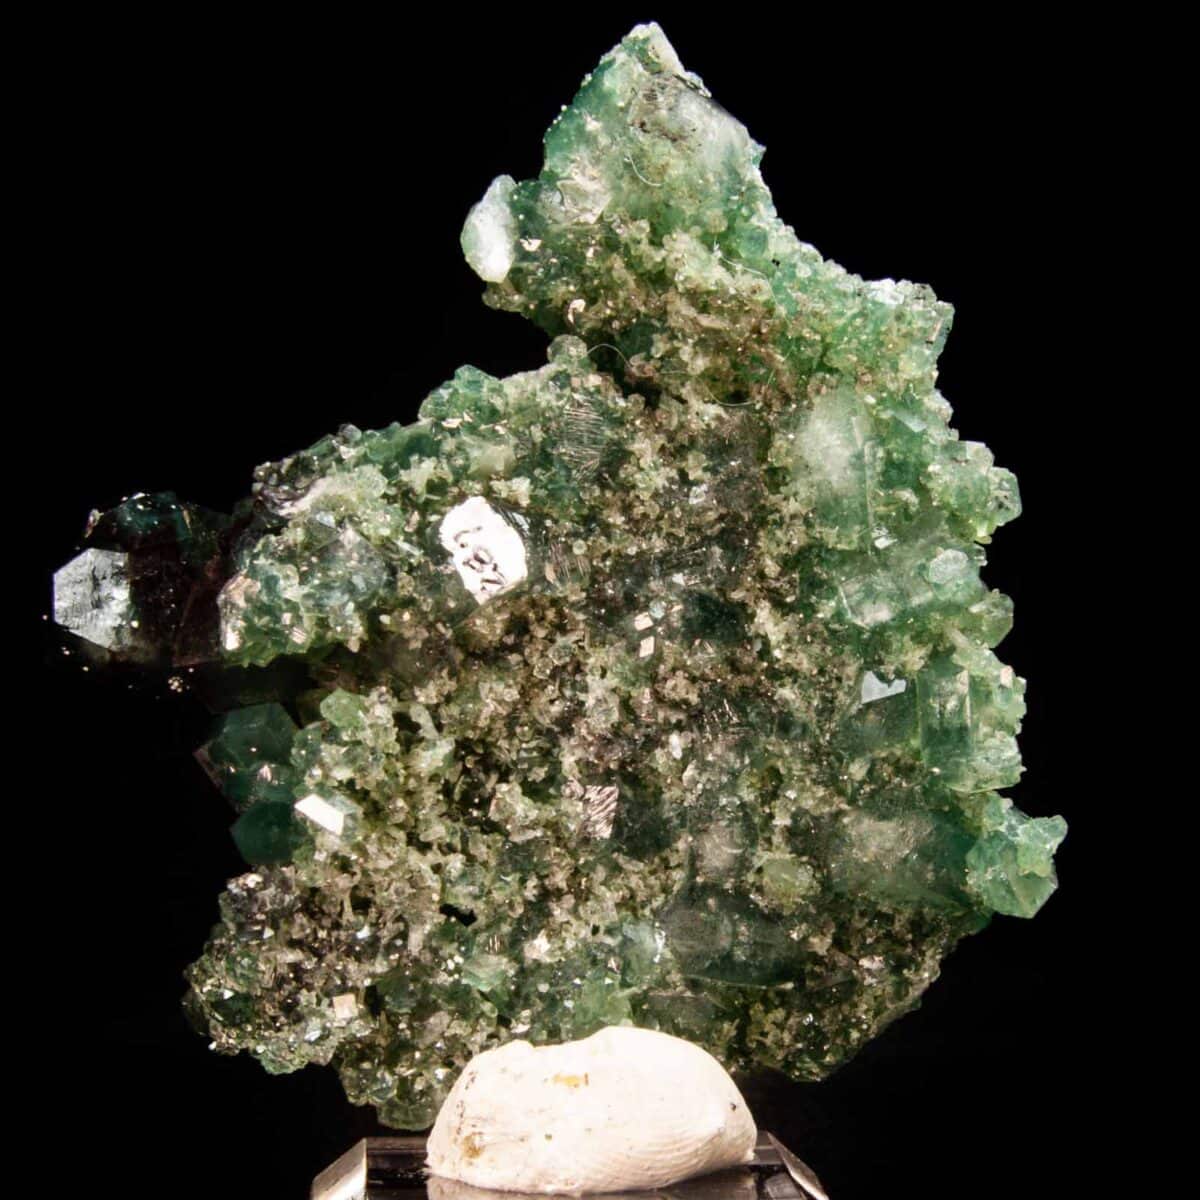 Apophyllite with Celadonite inclusions